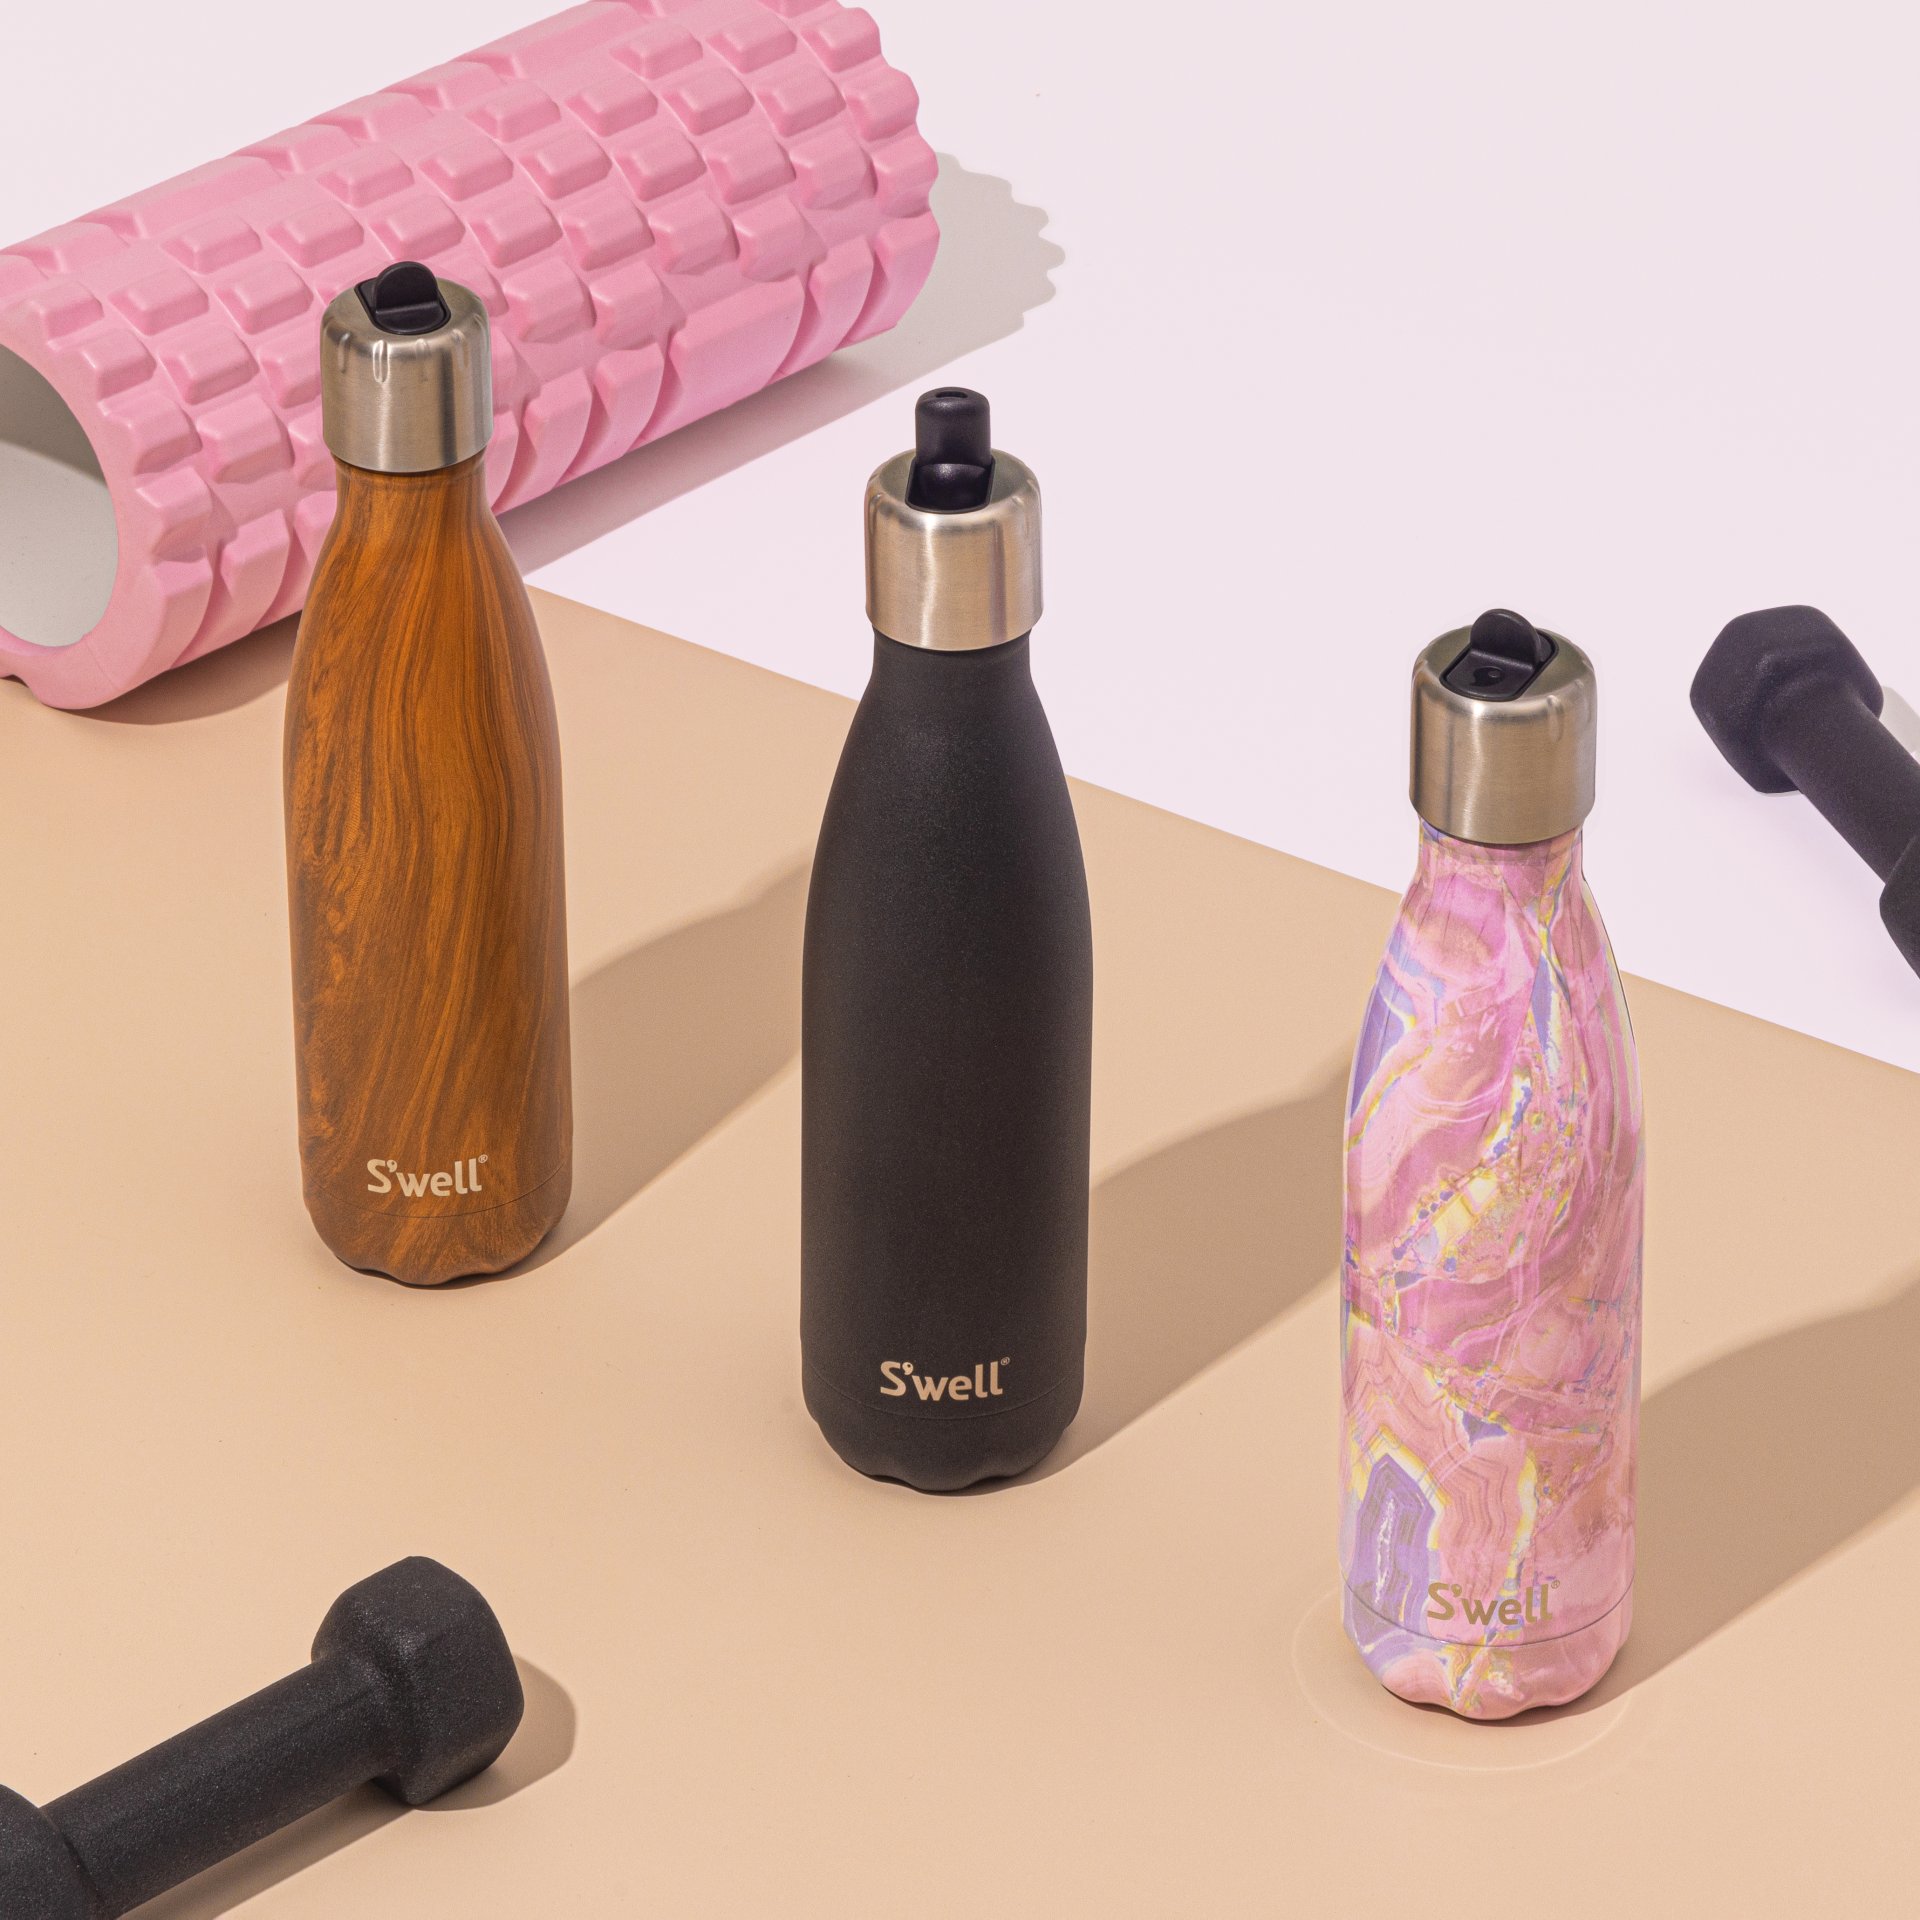 Three S'Well water bottles of different designs are positioned alongside workout equipment.